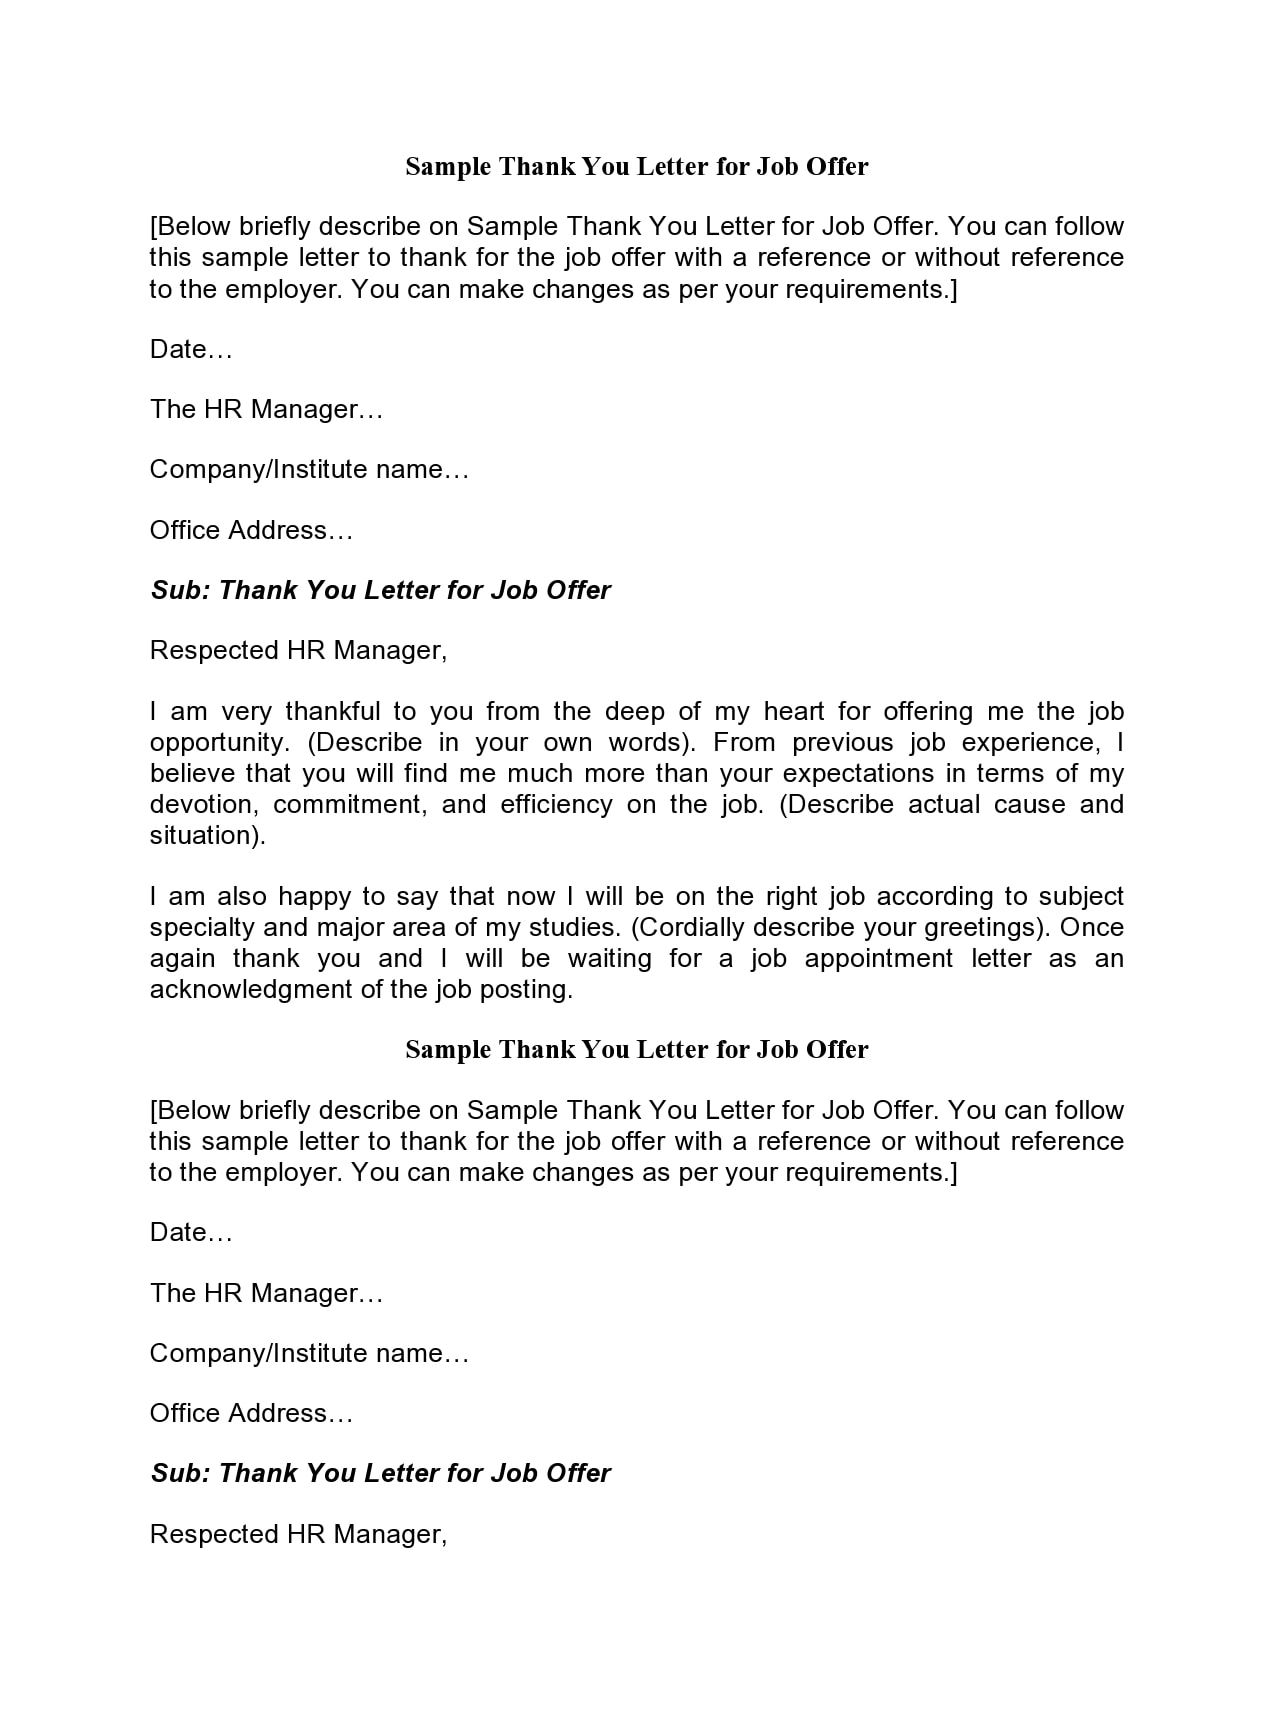 Sample Letter Of Good Standing From Employer from templatearchive.com